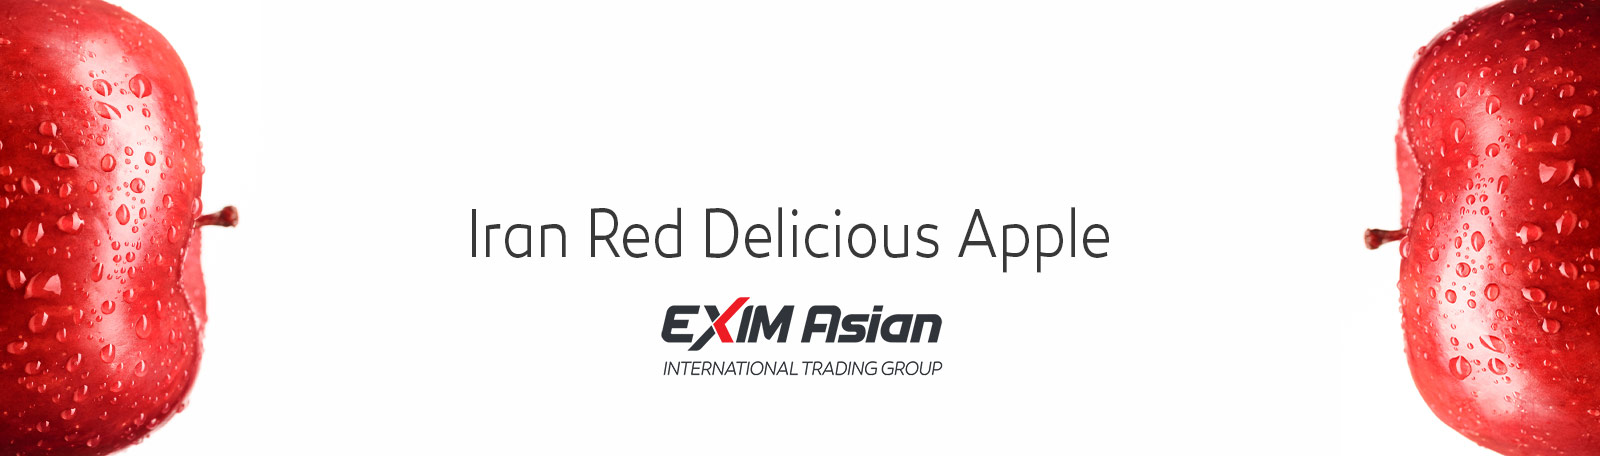 Iranian Red Delicious apple EXM Asian